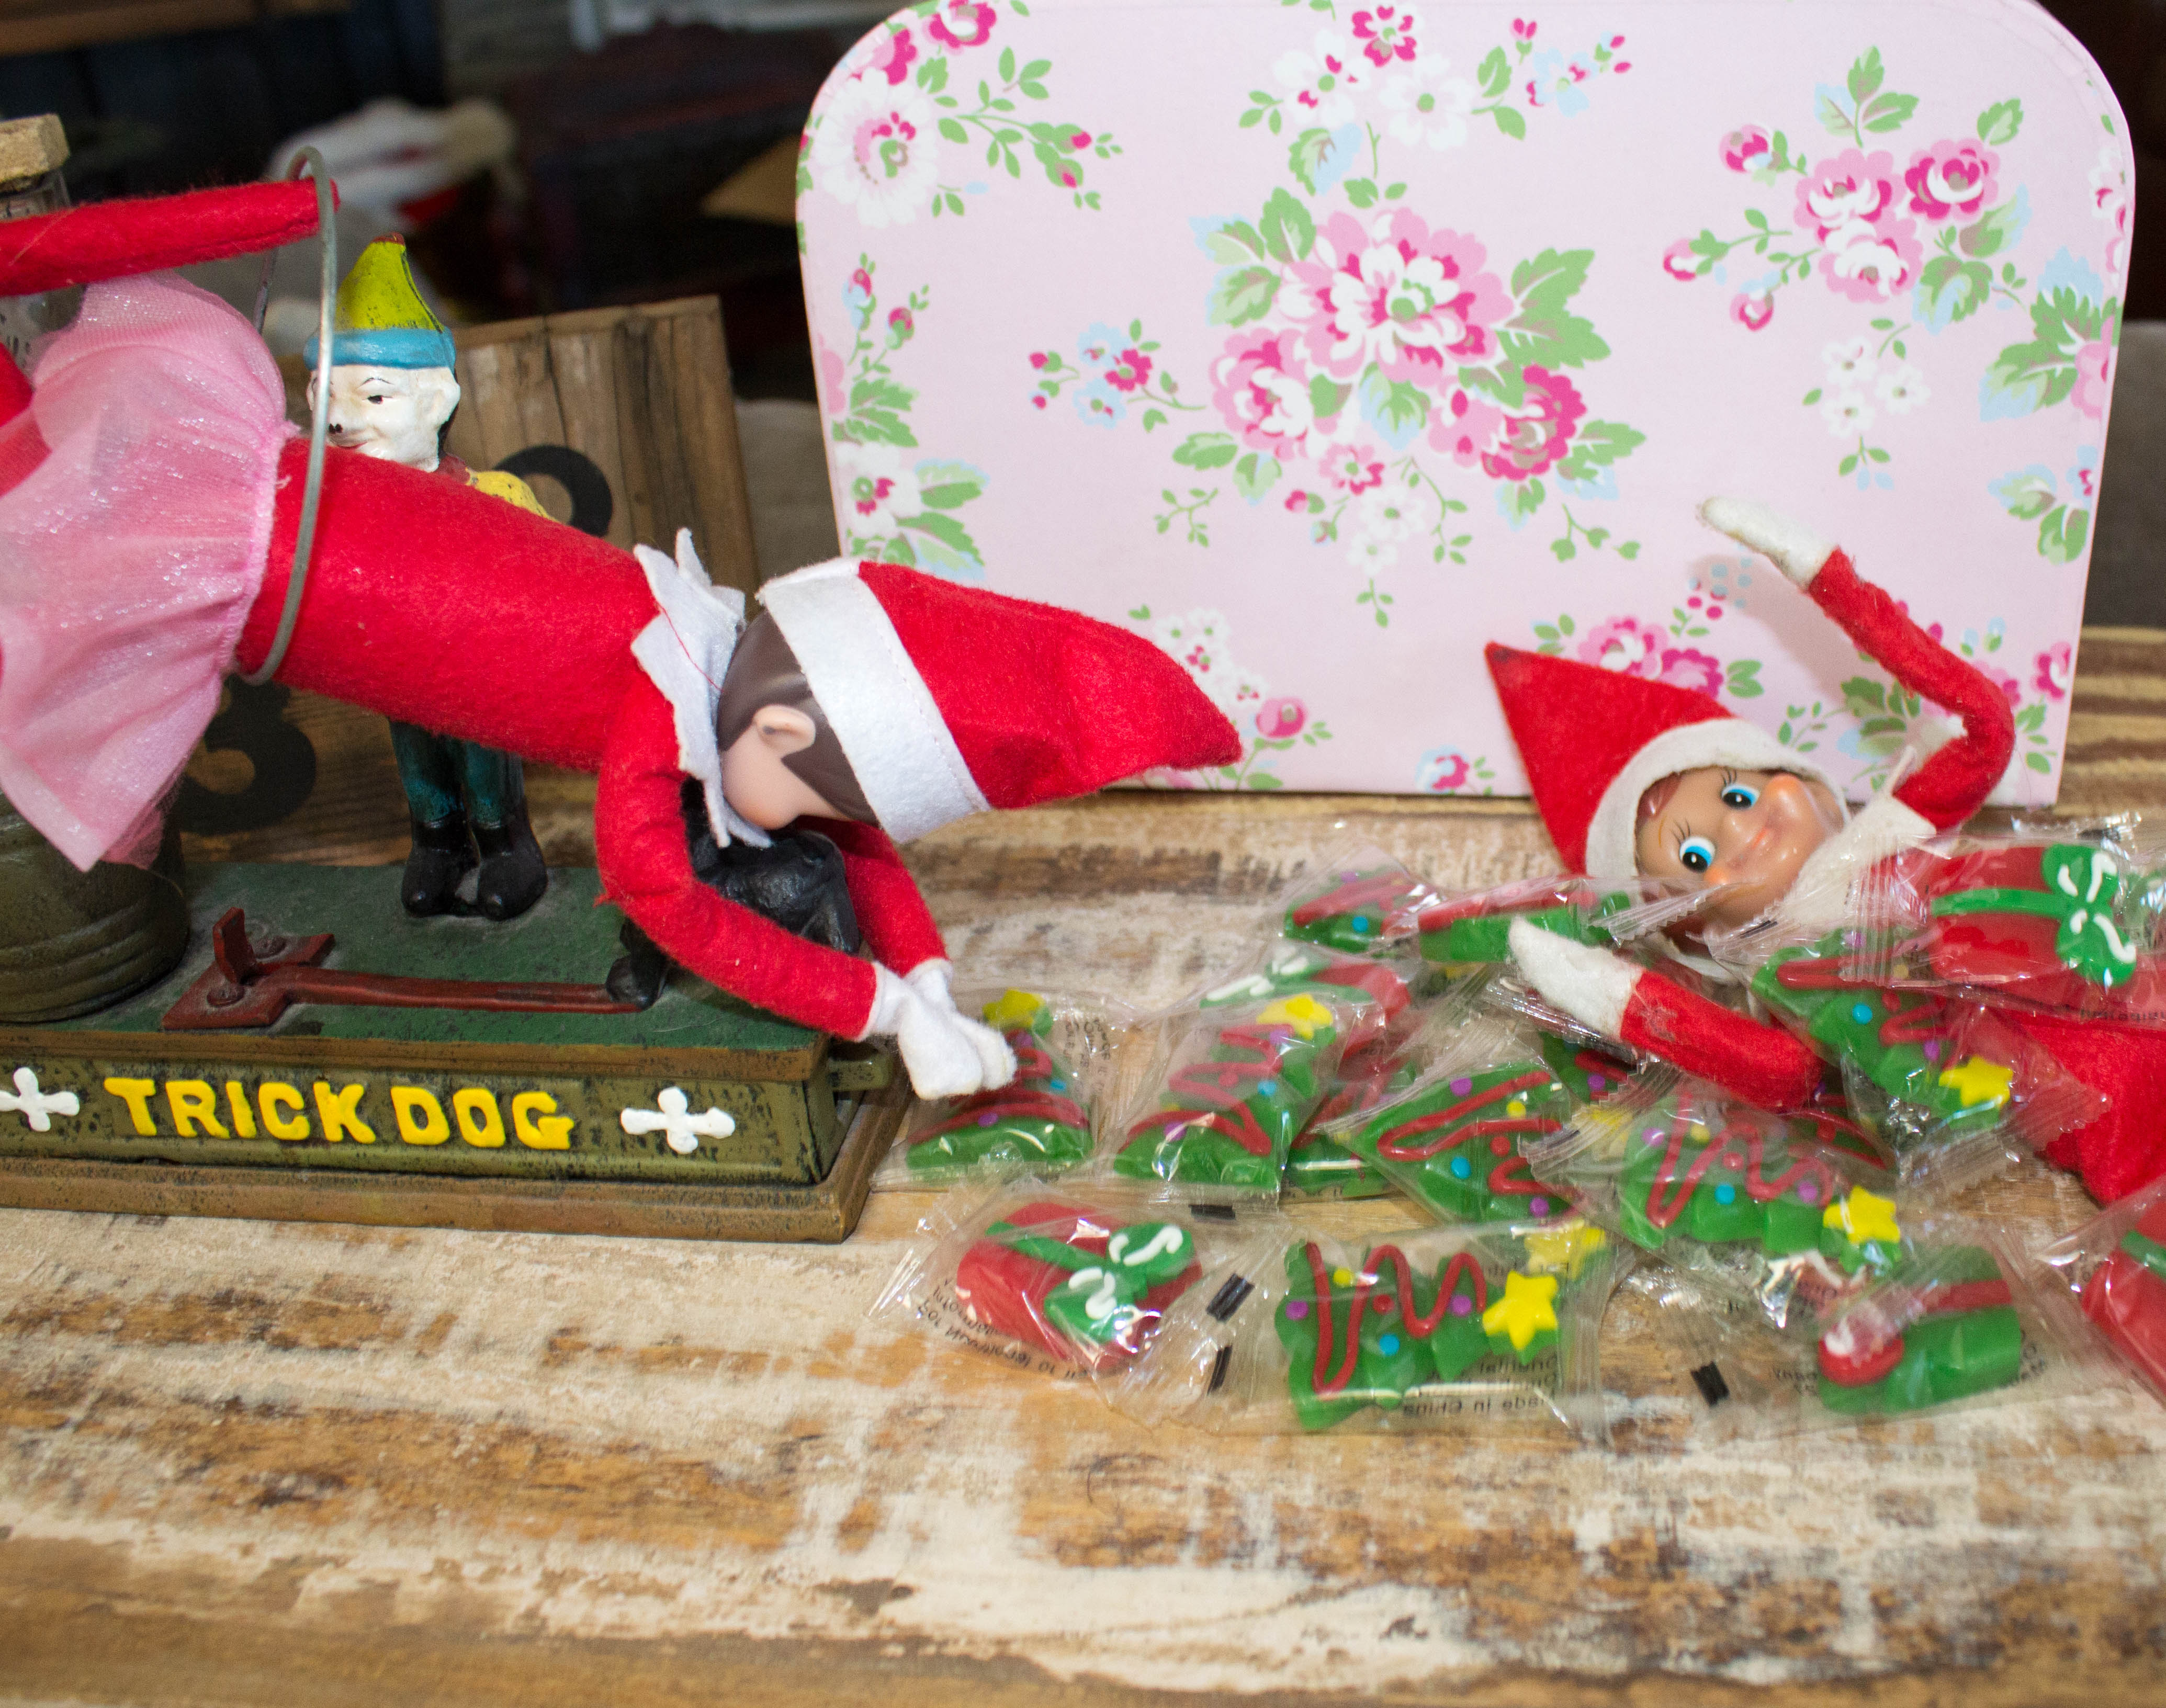 elf-on-the-shelf-ideas-and-elf-on-shelf-products-scenes-christmas-traditions-12